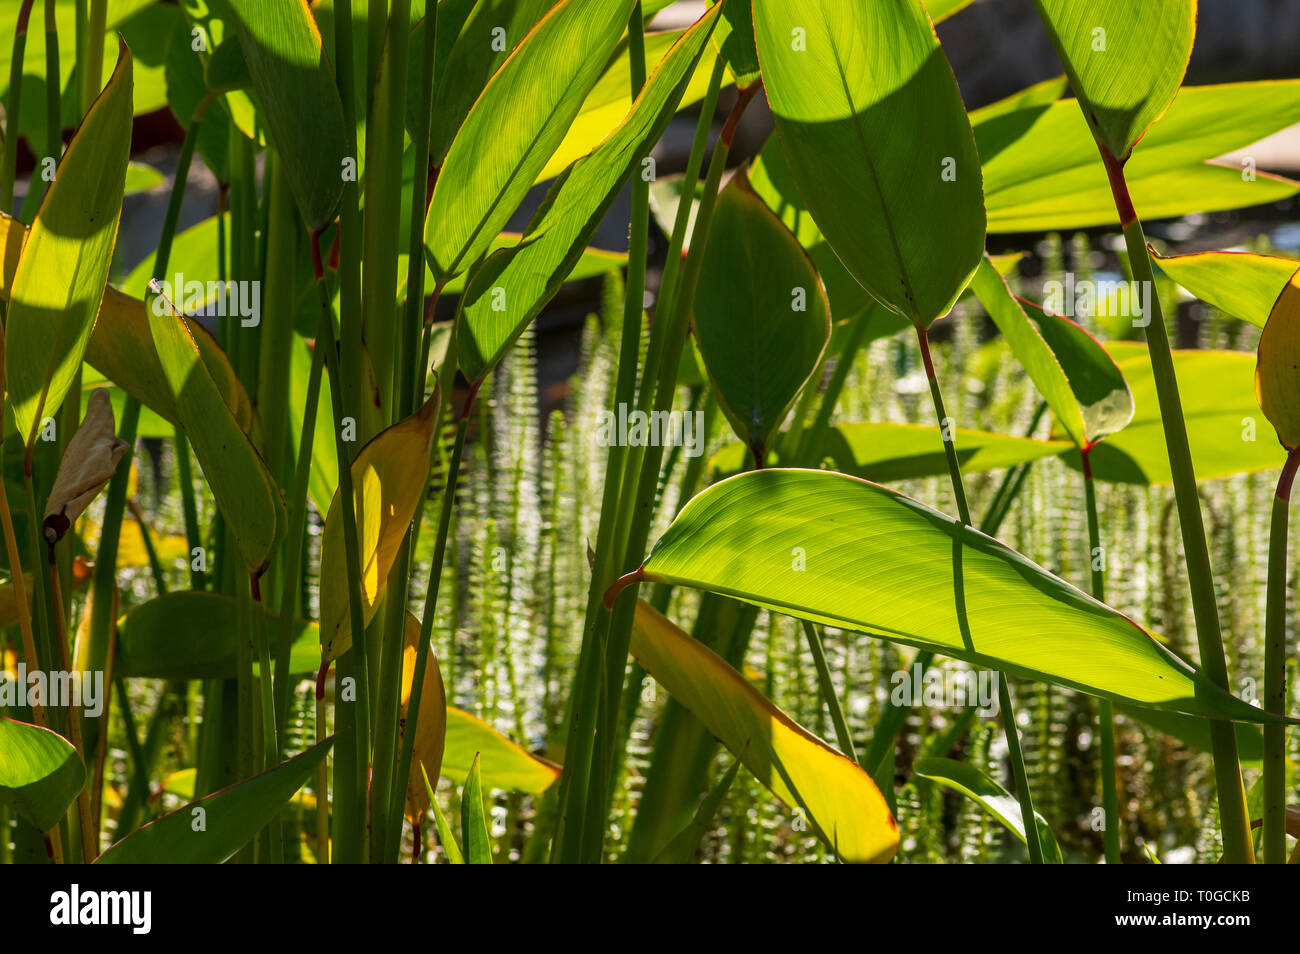 Large-leaved green pond plant in the foreground, common mares-tail, Hippuris vulgaris, in background Stock Photo